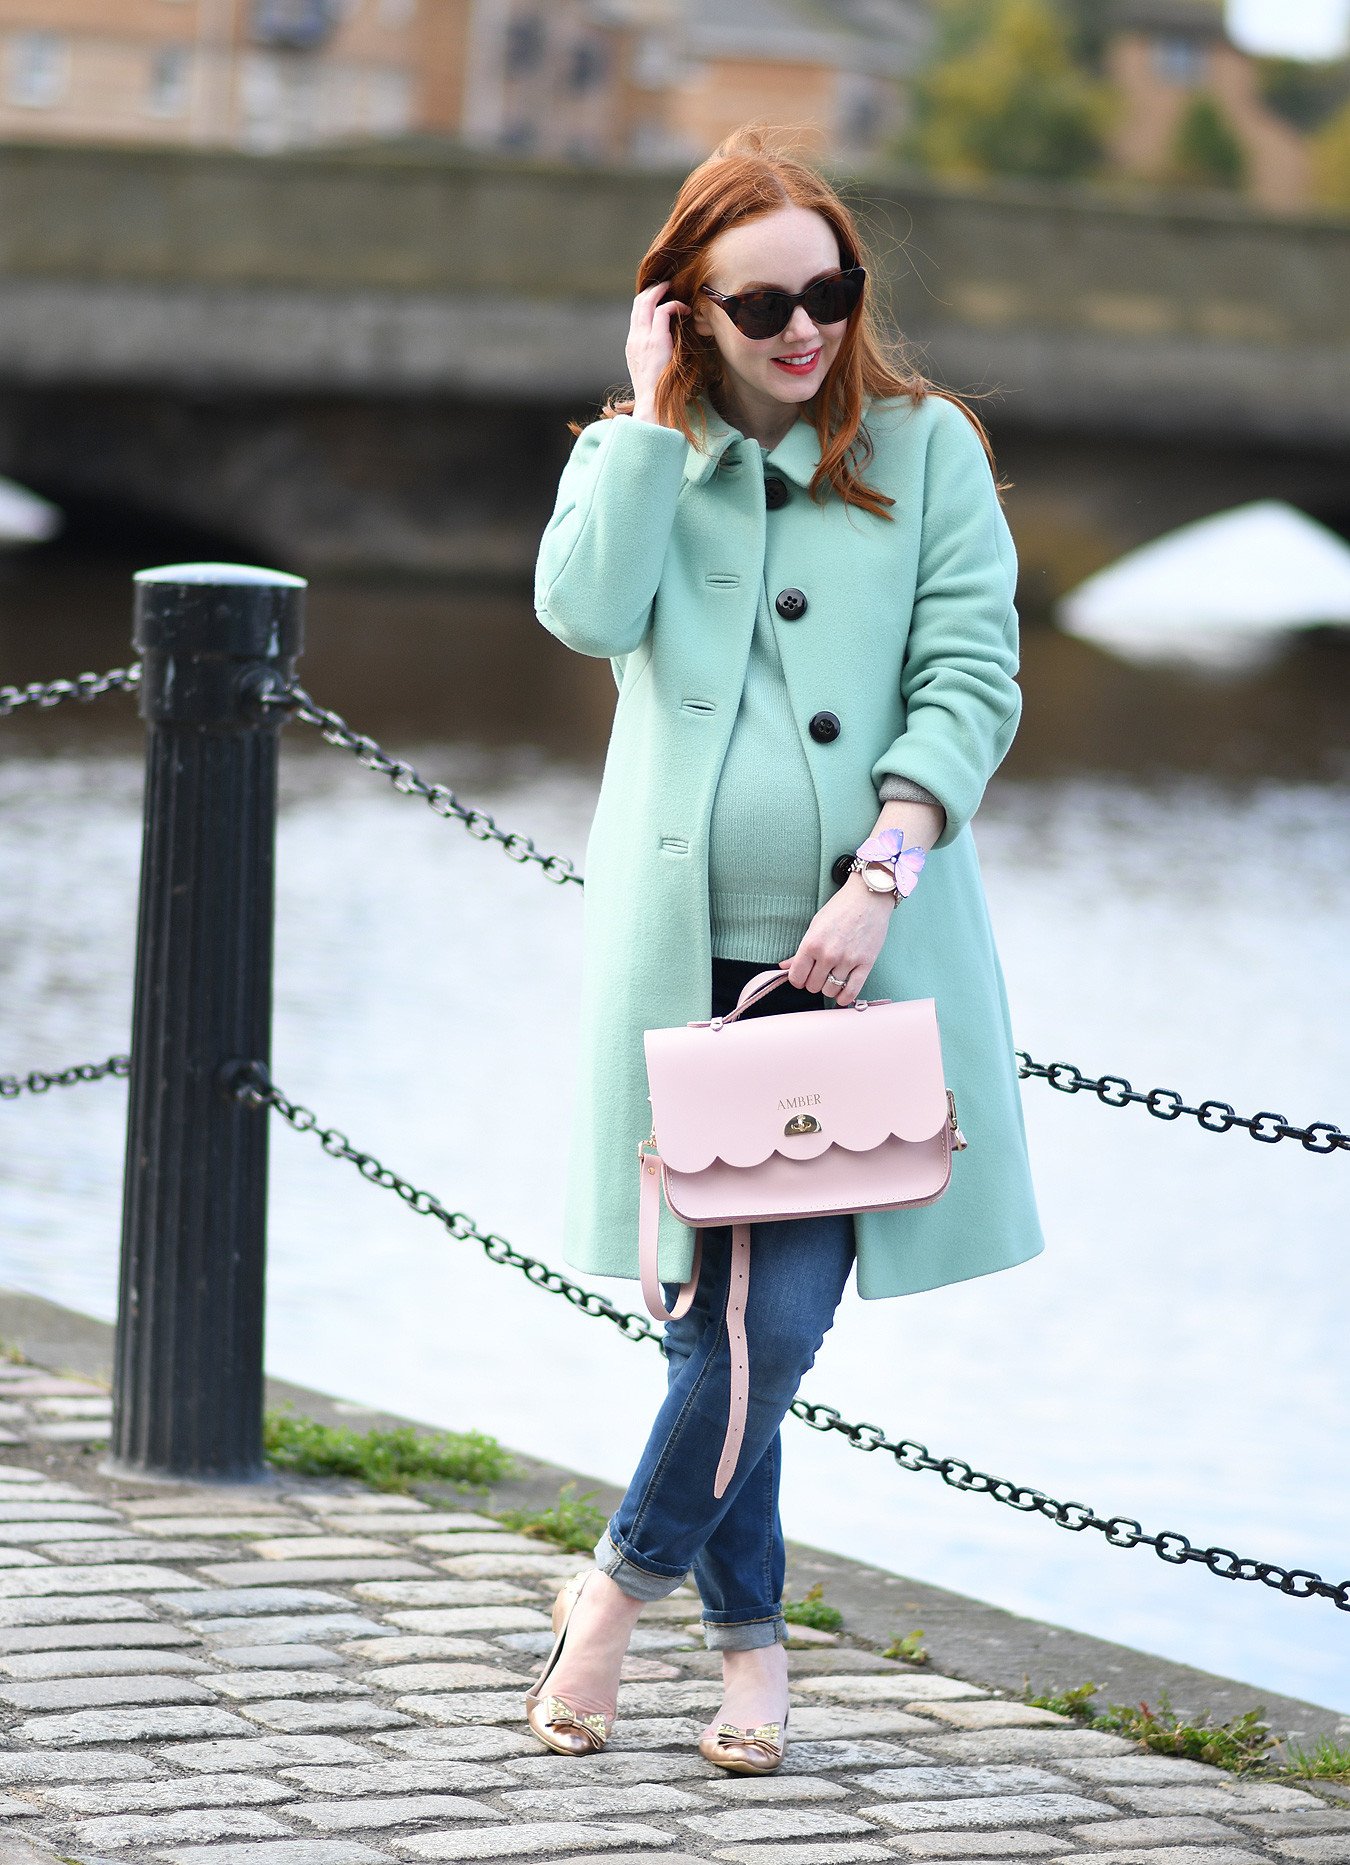 maternity style 28 weeks: mint green winter coat with jeans